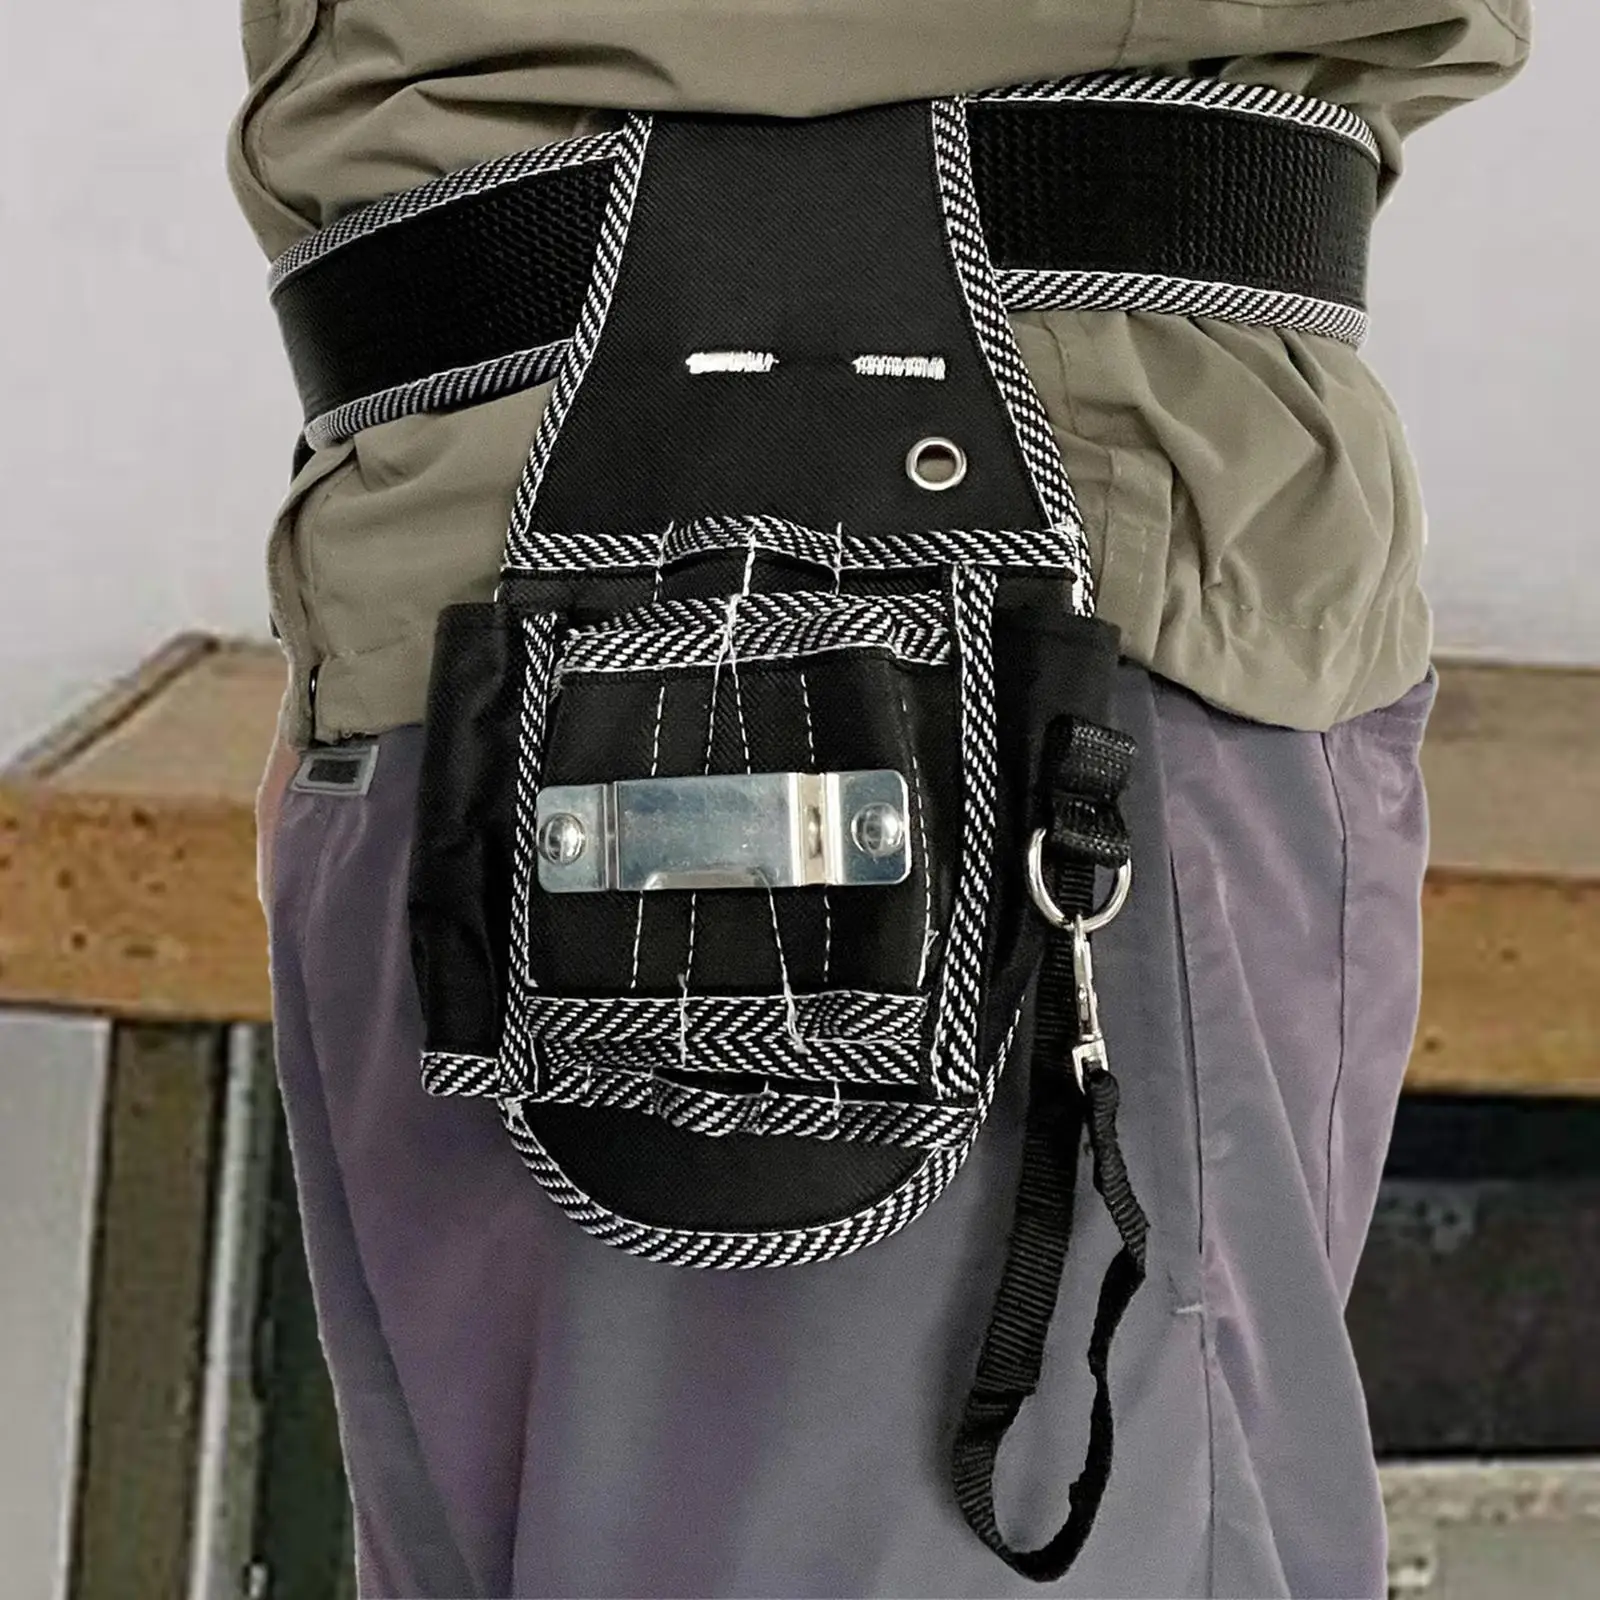 Adjustable Waist Belt Tool Storage Pouch with Belt Multifunctional Tool Pouch Bag for Camping Gear Construction Mechanics